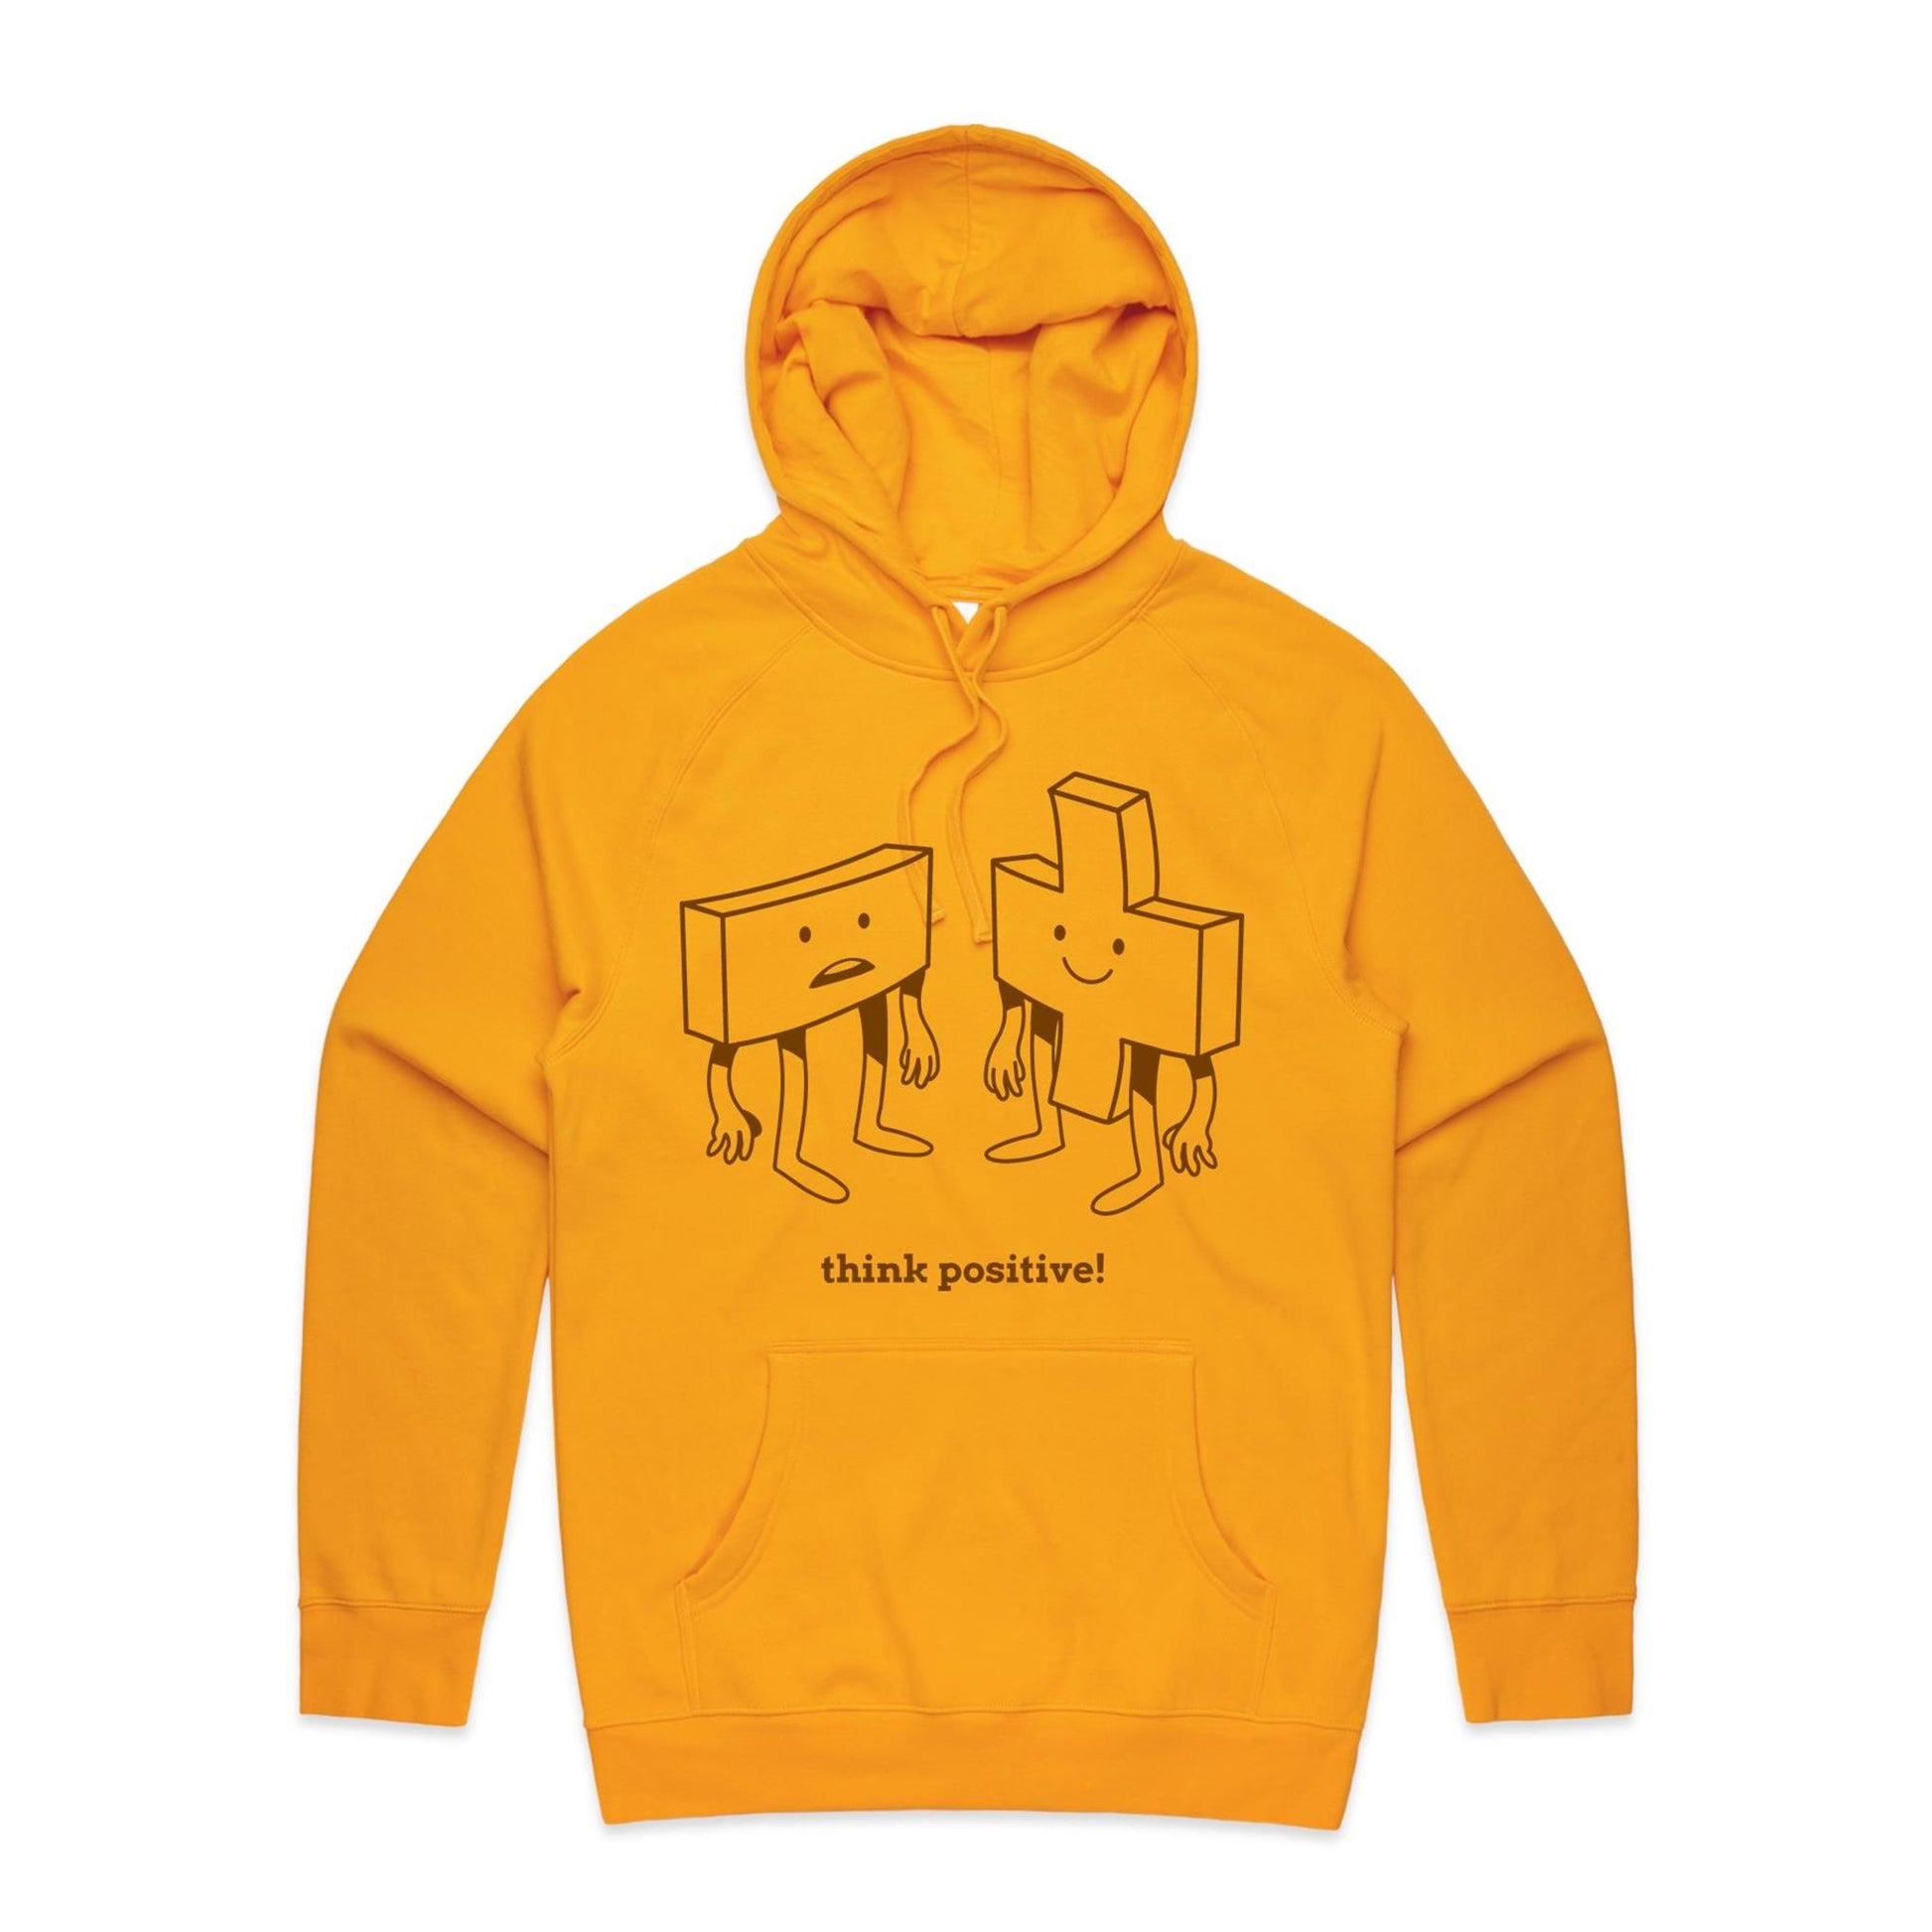 Think Positive, Plus And Minus - Supply Hood Gold Mens Supply Hoodie Maths Motivation